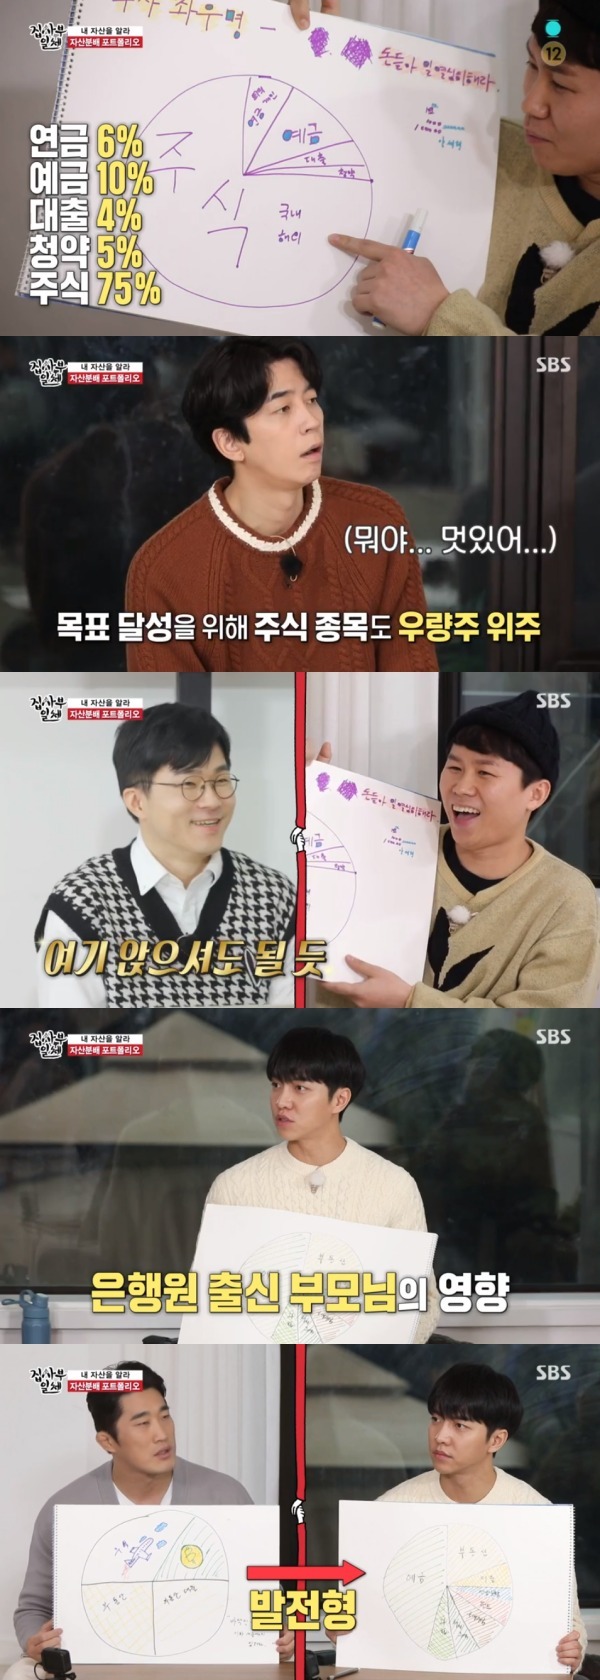 Seoul=) = Lee Seung-gi has released a stable Asset distribution table.SBS All The Butlers broadcast on the 28th appeared in the economic contents YouTuber Shuka.Before talking about the stock on the day, Shuka stressed that it is important to know how the Asset is distributed; members drew the Asset allocation table before Shuka came.If you look at my portfolio, your mom might be worried, said Yang Se-hyeong, whose mother was investing 20 percent in virtual currency.Kim Dong-Hyun surprised Shuka by saying there were no safety sets such as deposits; Shuka advised that safety Asset should be expanded.Shin Sung-rok was mostly real estate and real estate loans; Shuka described it as a general look of the vast majority of people and a fairly aggressive investment.Yang Se-hyeong had a variety of pensions, deposits and subscriptions, although most of the shares were stock; Shuka analyzed it as aggressive but still rational.Yang Se-hyeong explained his long-term investment plan, which Shuka admired, saying he could sit here; Lee Seung-gi also had various forms of property.The deposit was the most at 40 percent; Shin Sung-rok, who saw it, laughed when he said, Cant you marry me? Its a typical rich portfolio, Shuka said.My parents are from bankers and so they do it stably, Lee Seung-gi said.